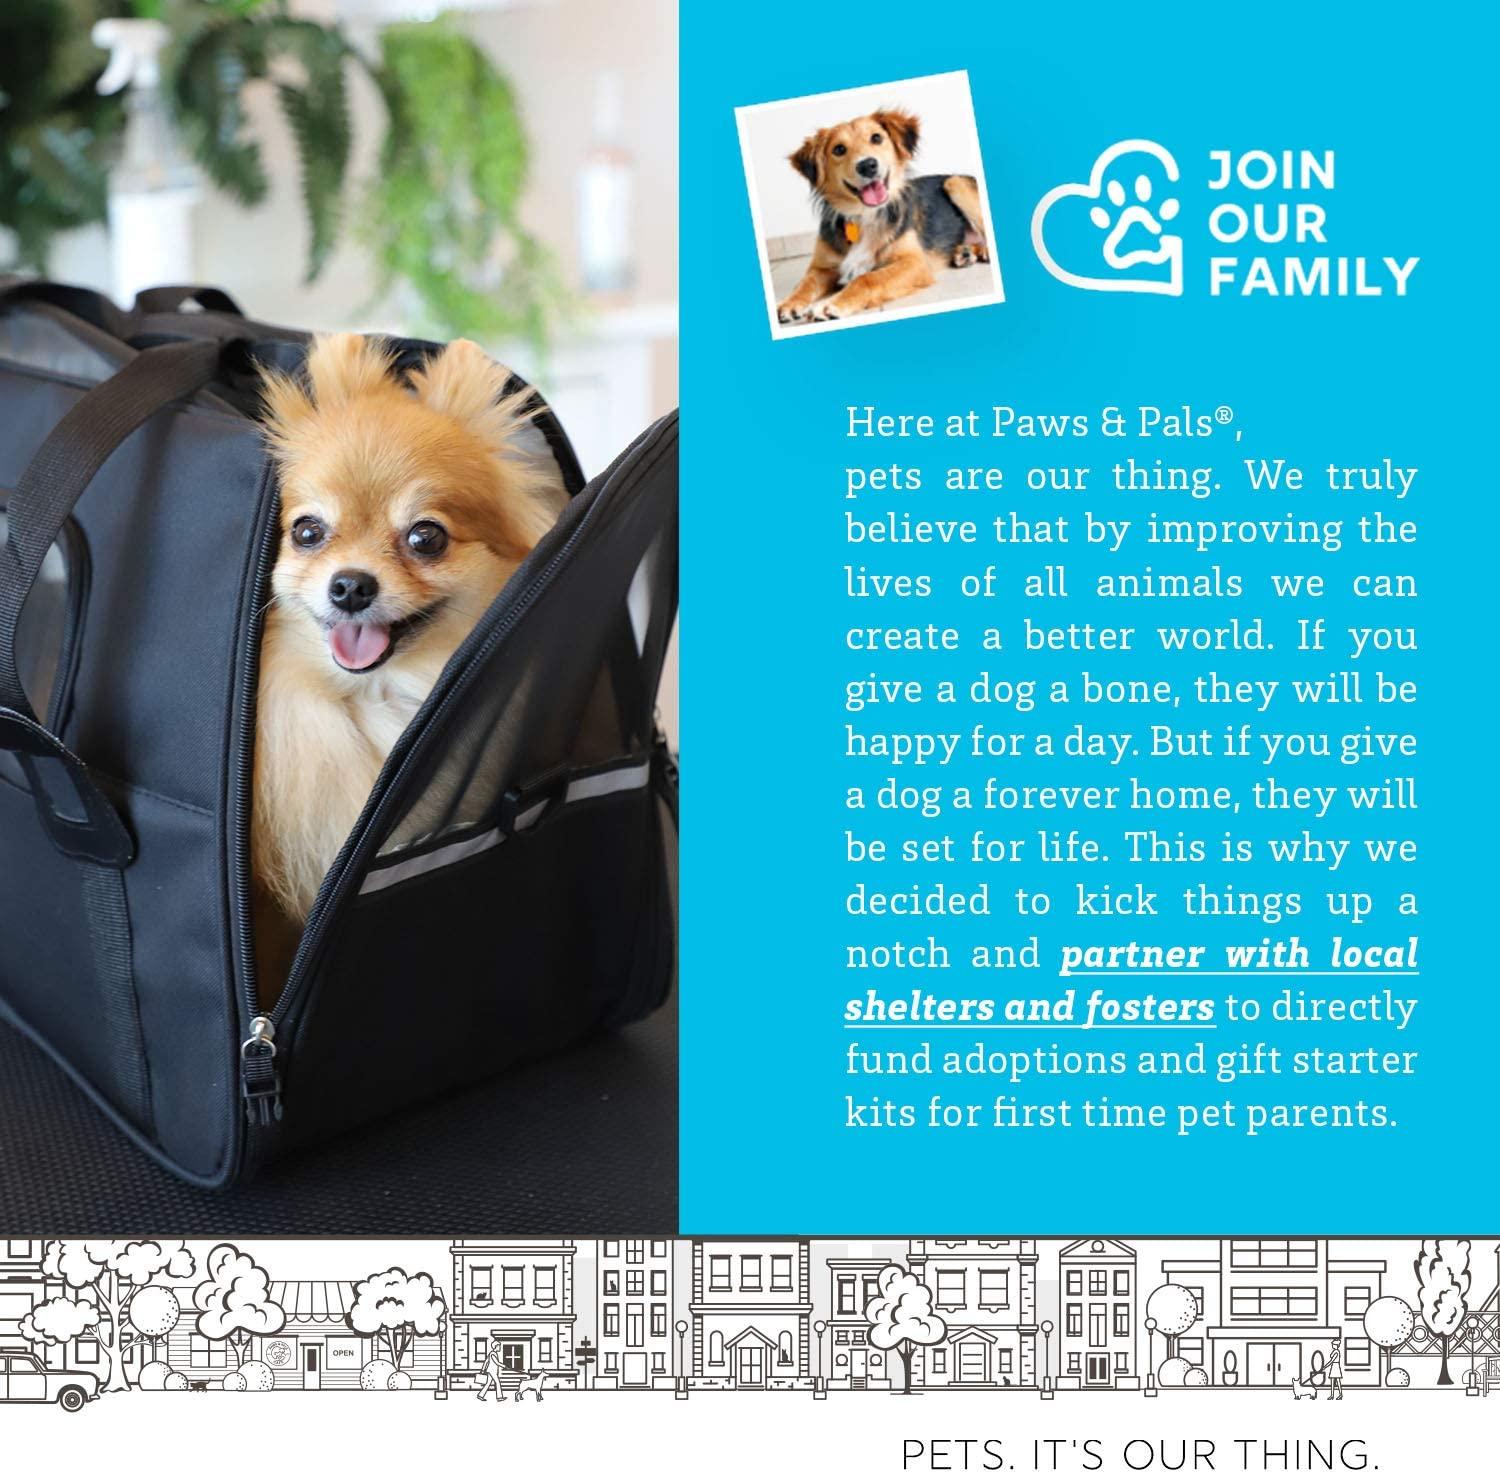 Airline Approved Pet Carrier - Soft-Sided Carriers for Small Medium Cats  and Dogs Air-Plane Travel